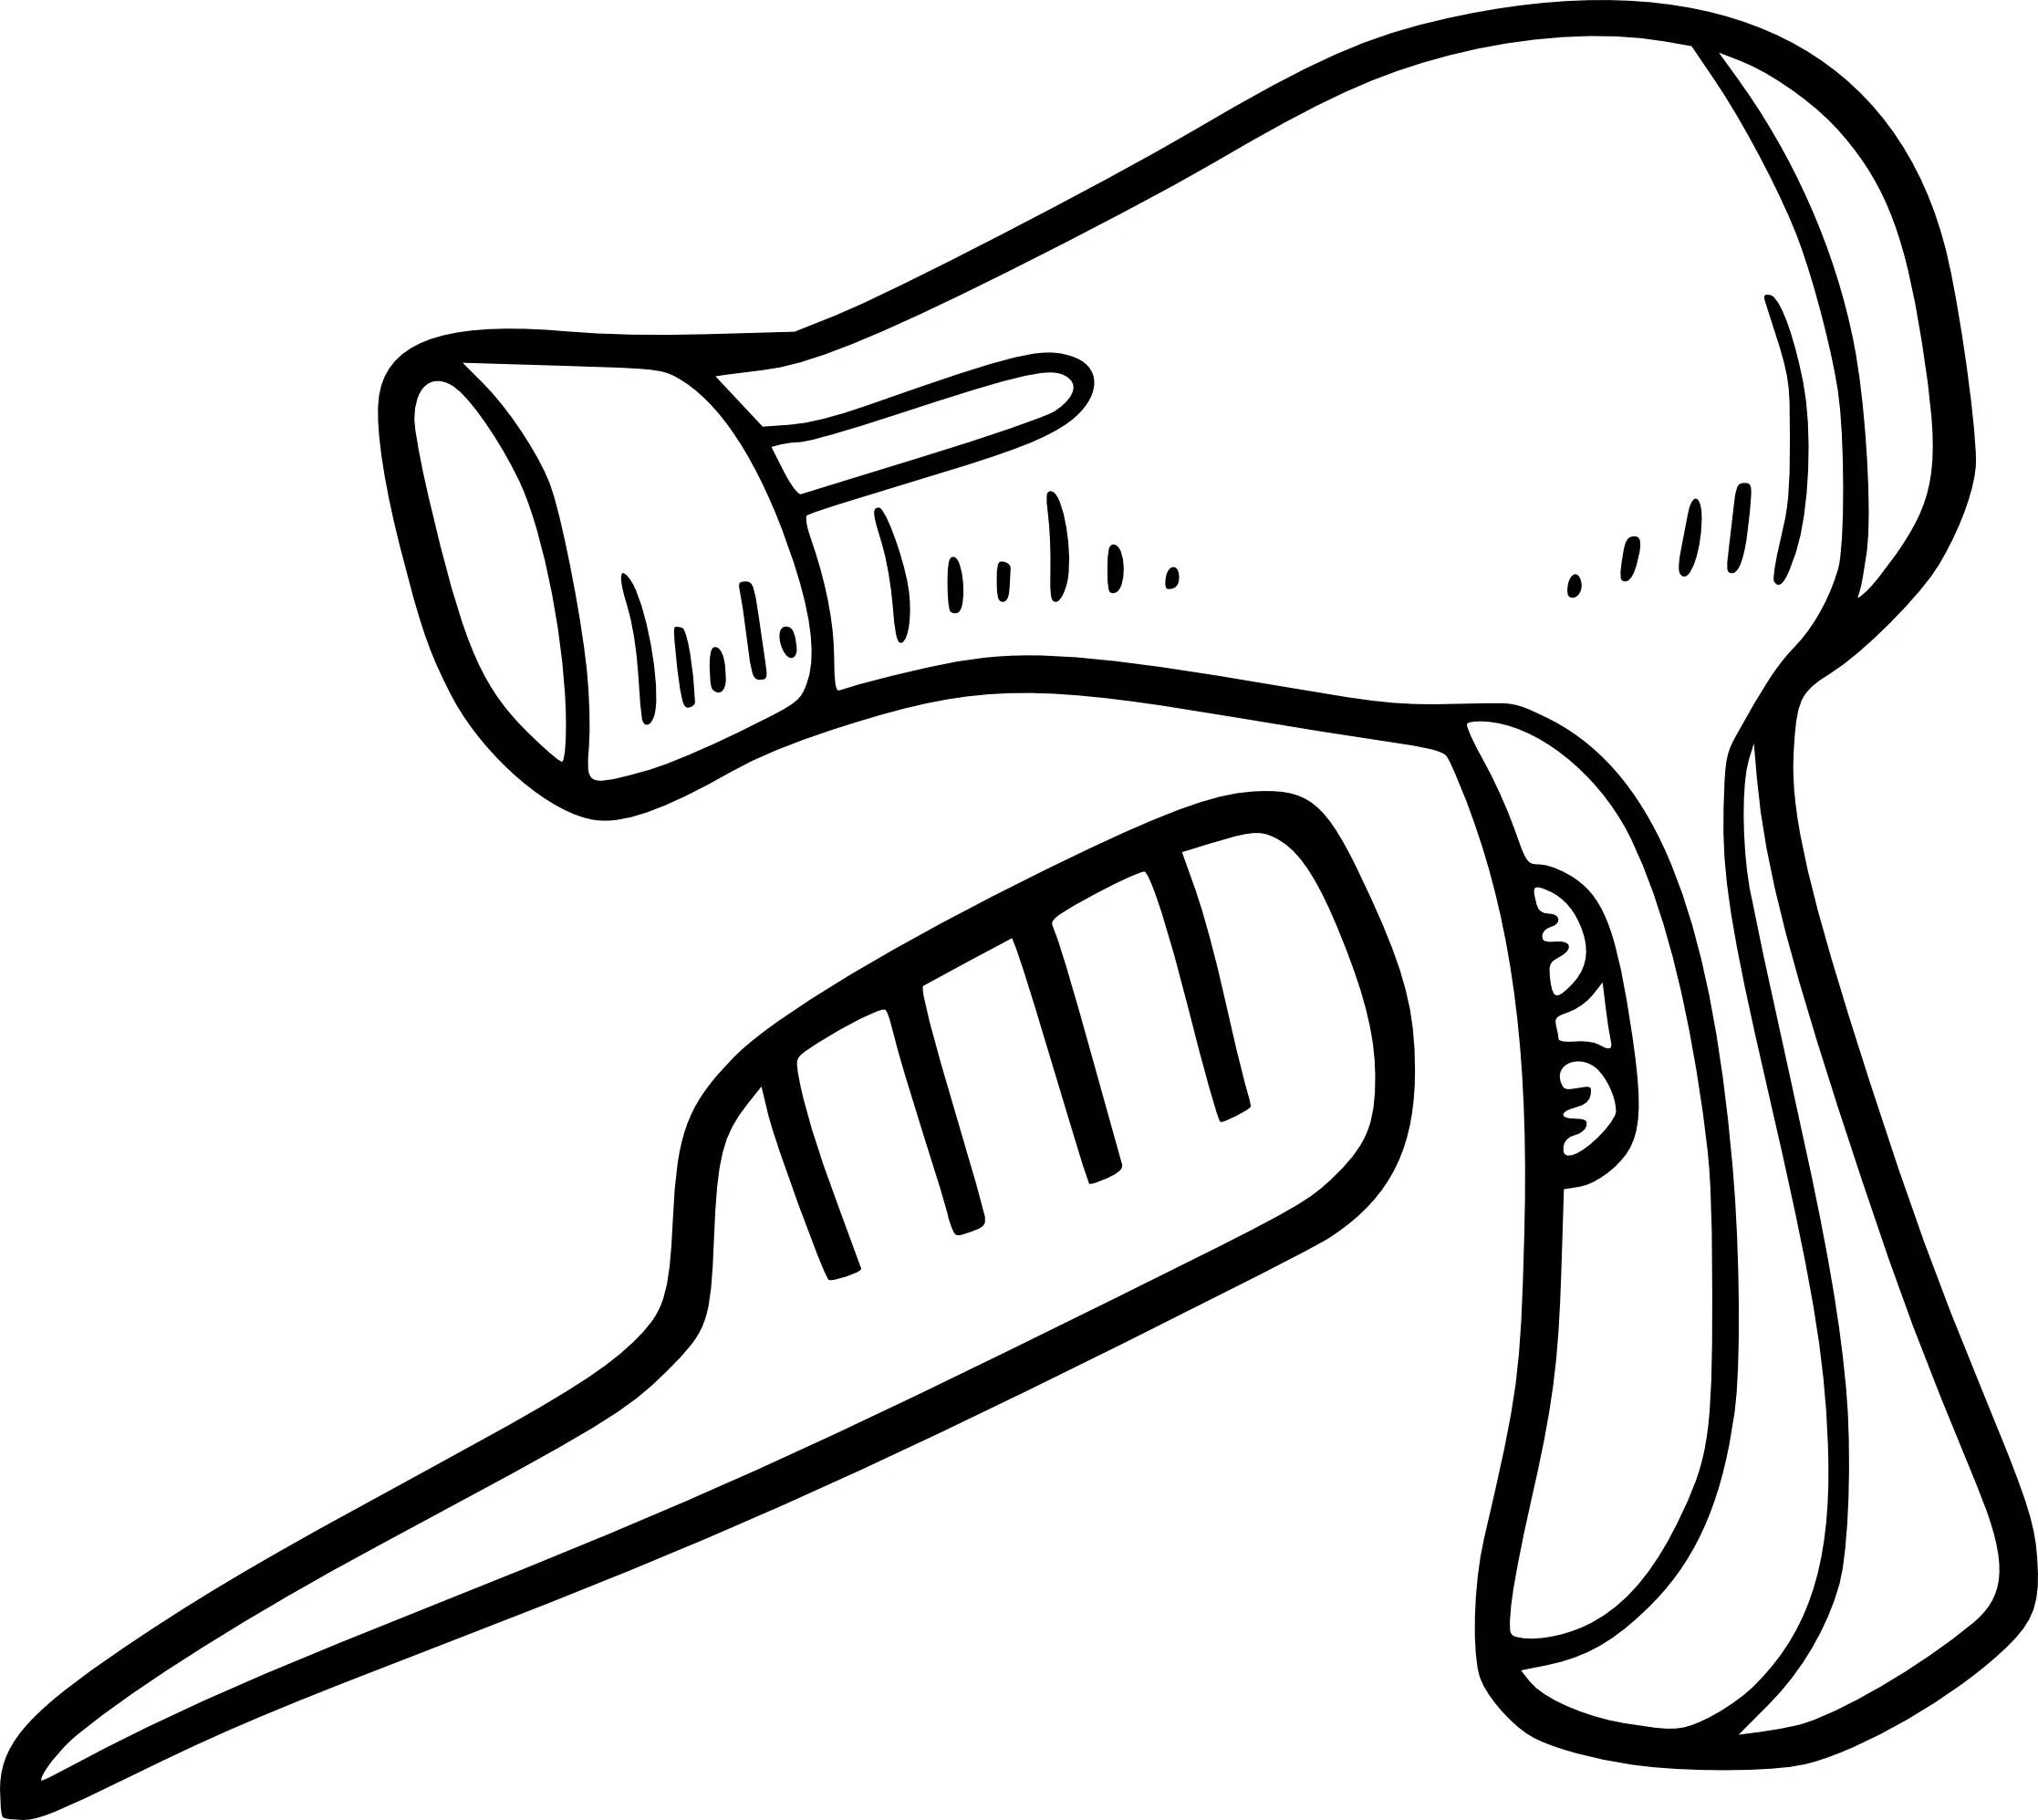 Fancy hair dryer coloring page for kids